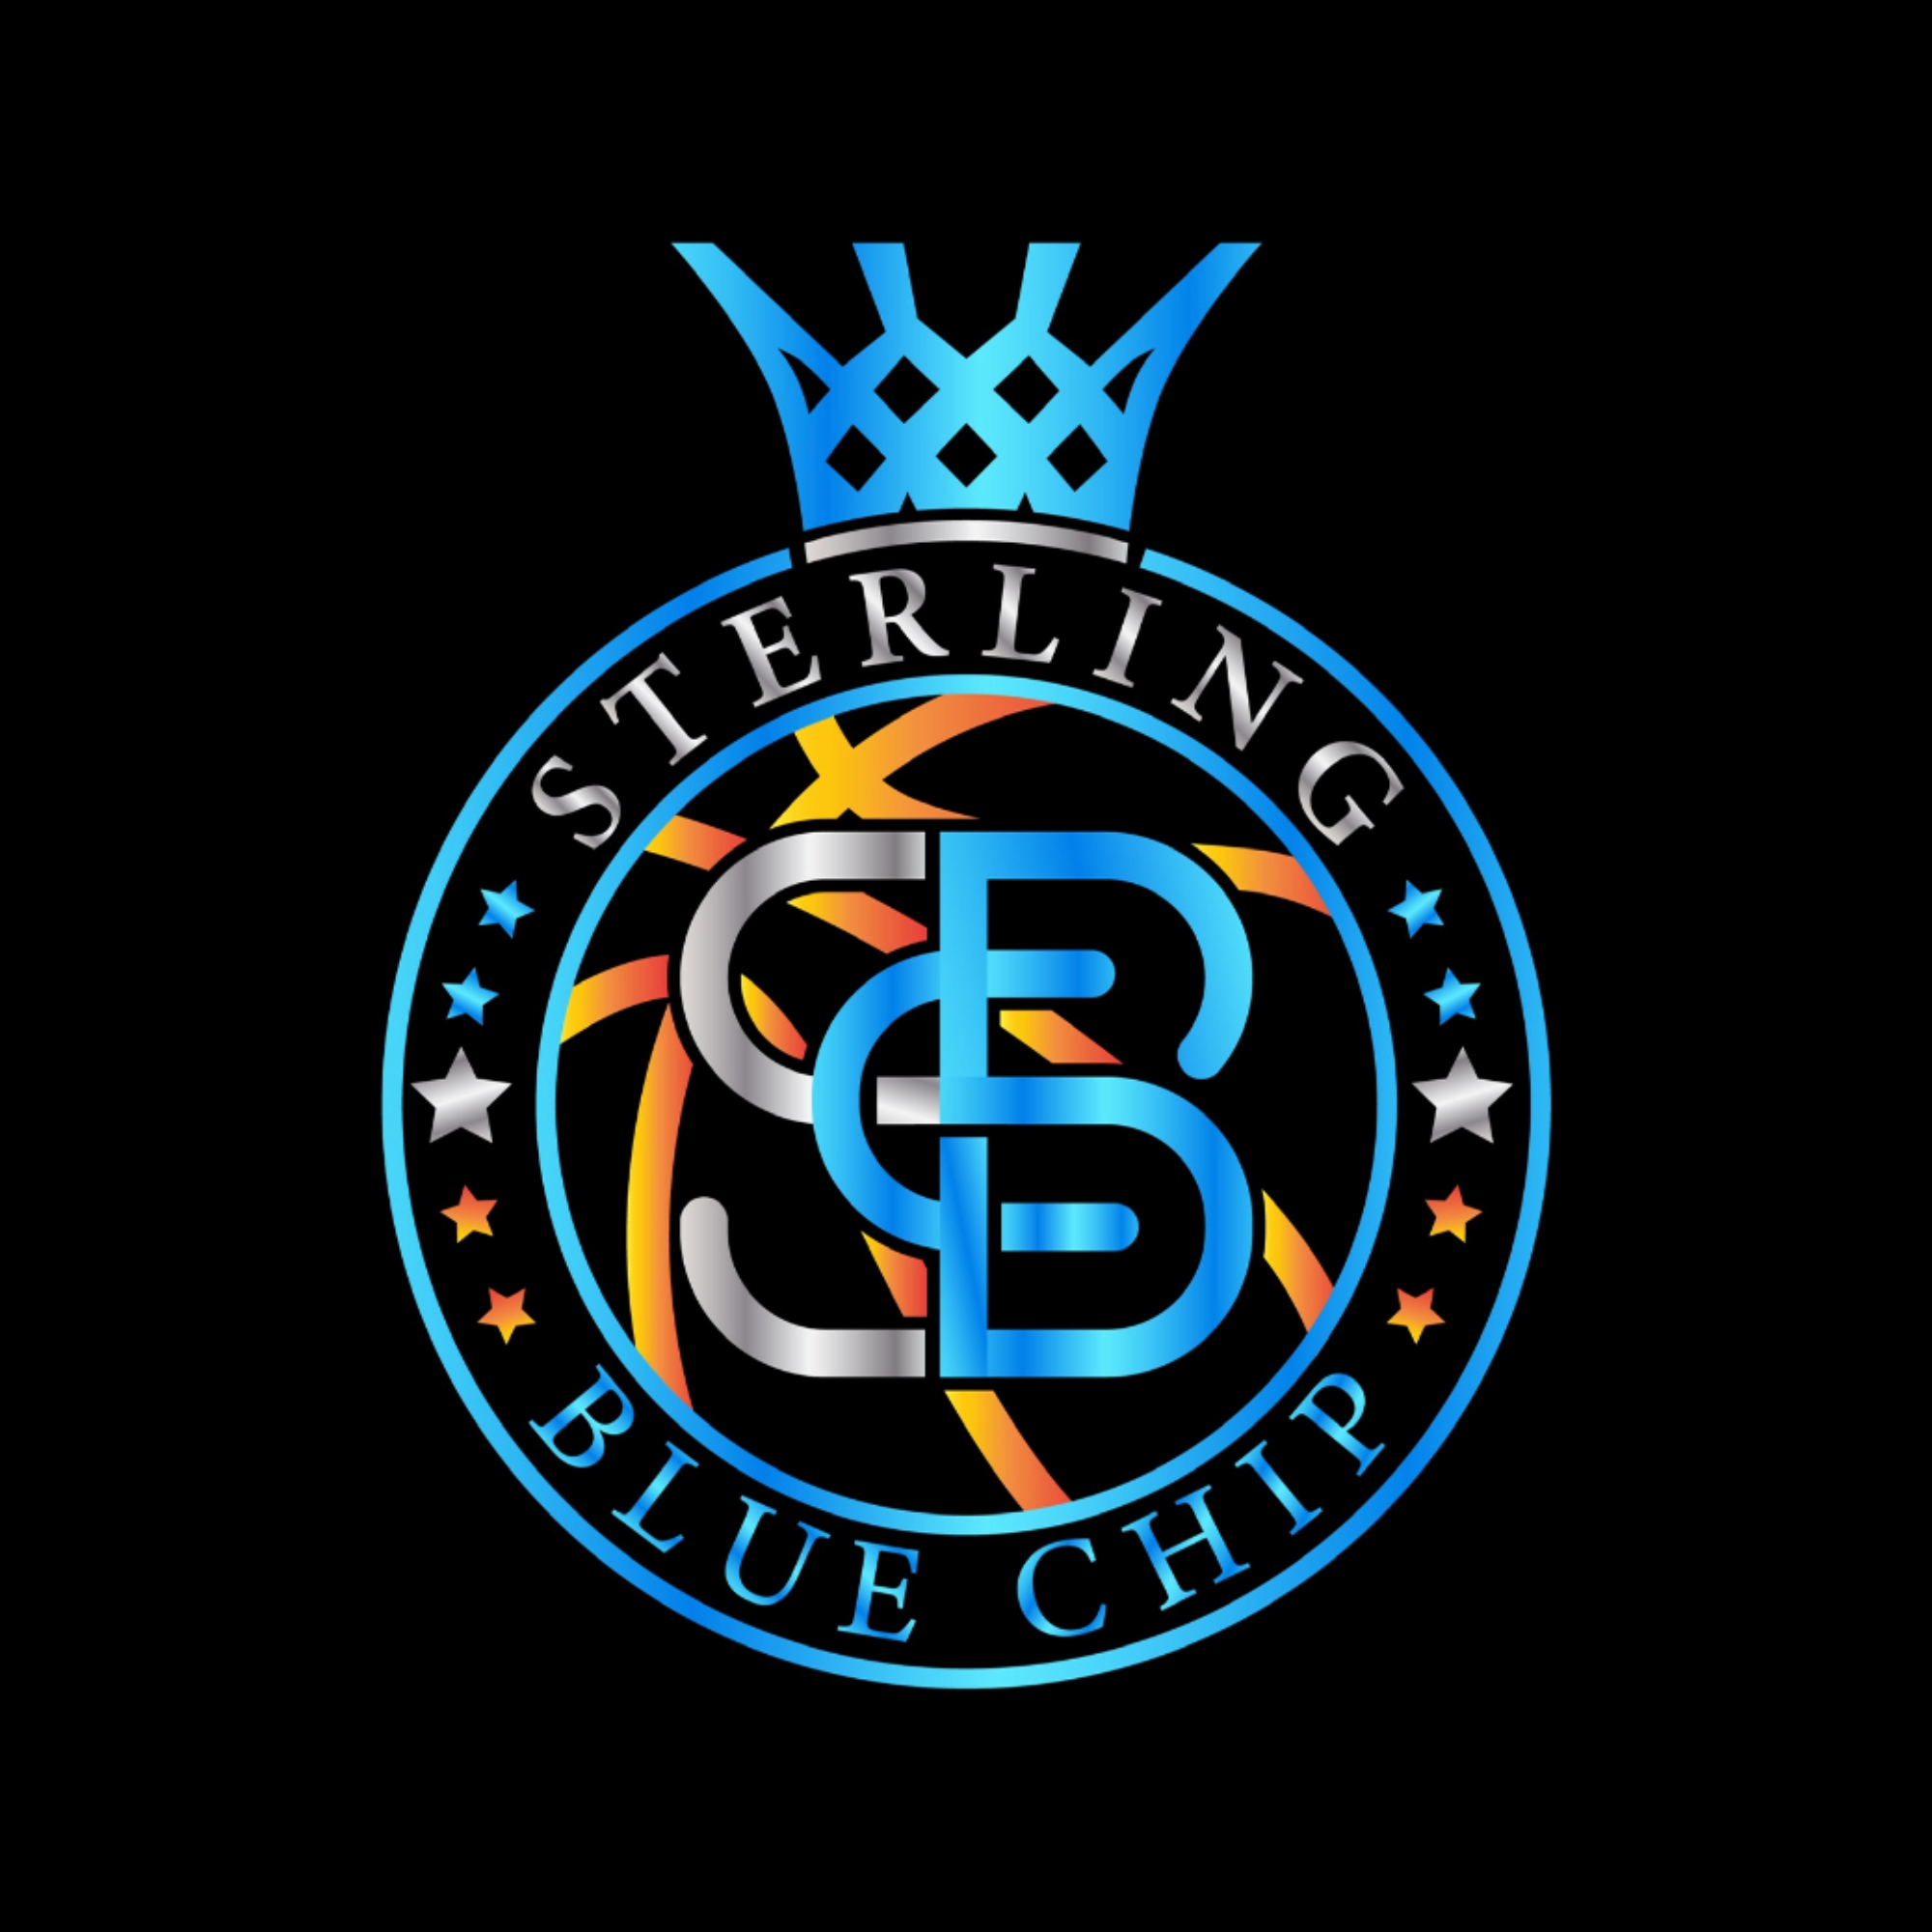 The official logo of SBC